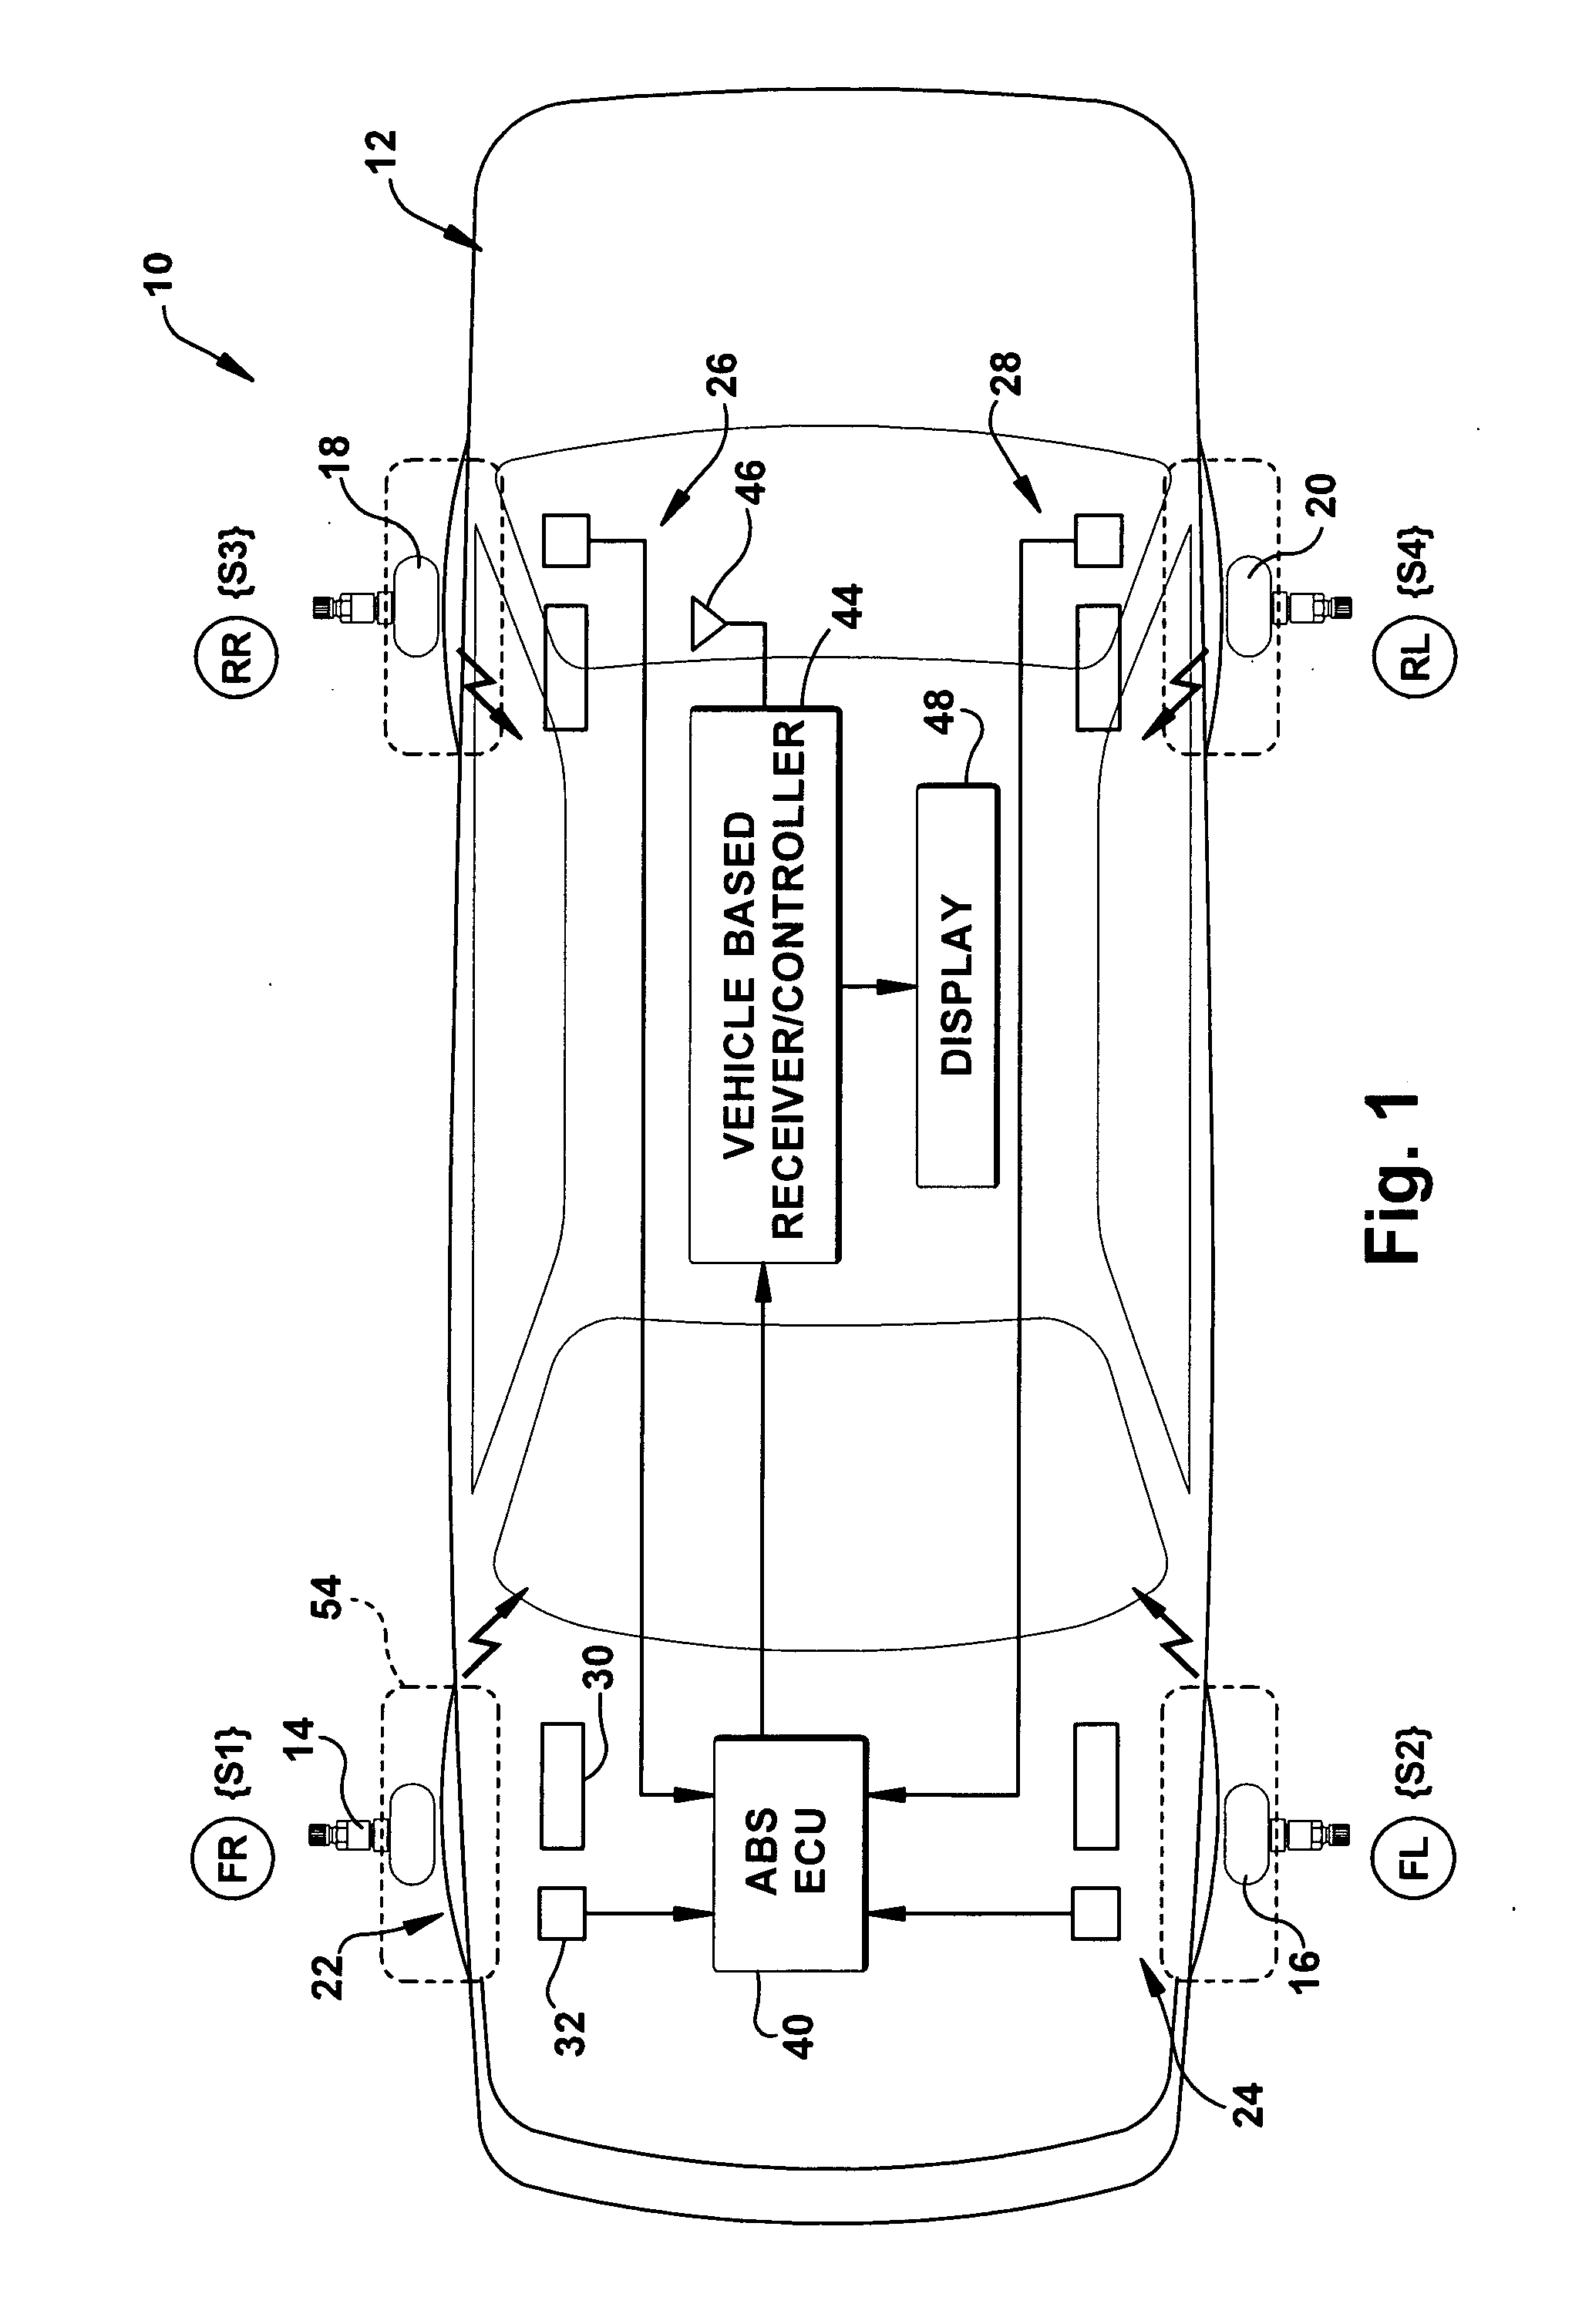 Method and apparatus for determining tire condition and location